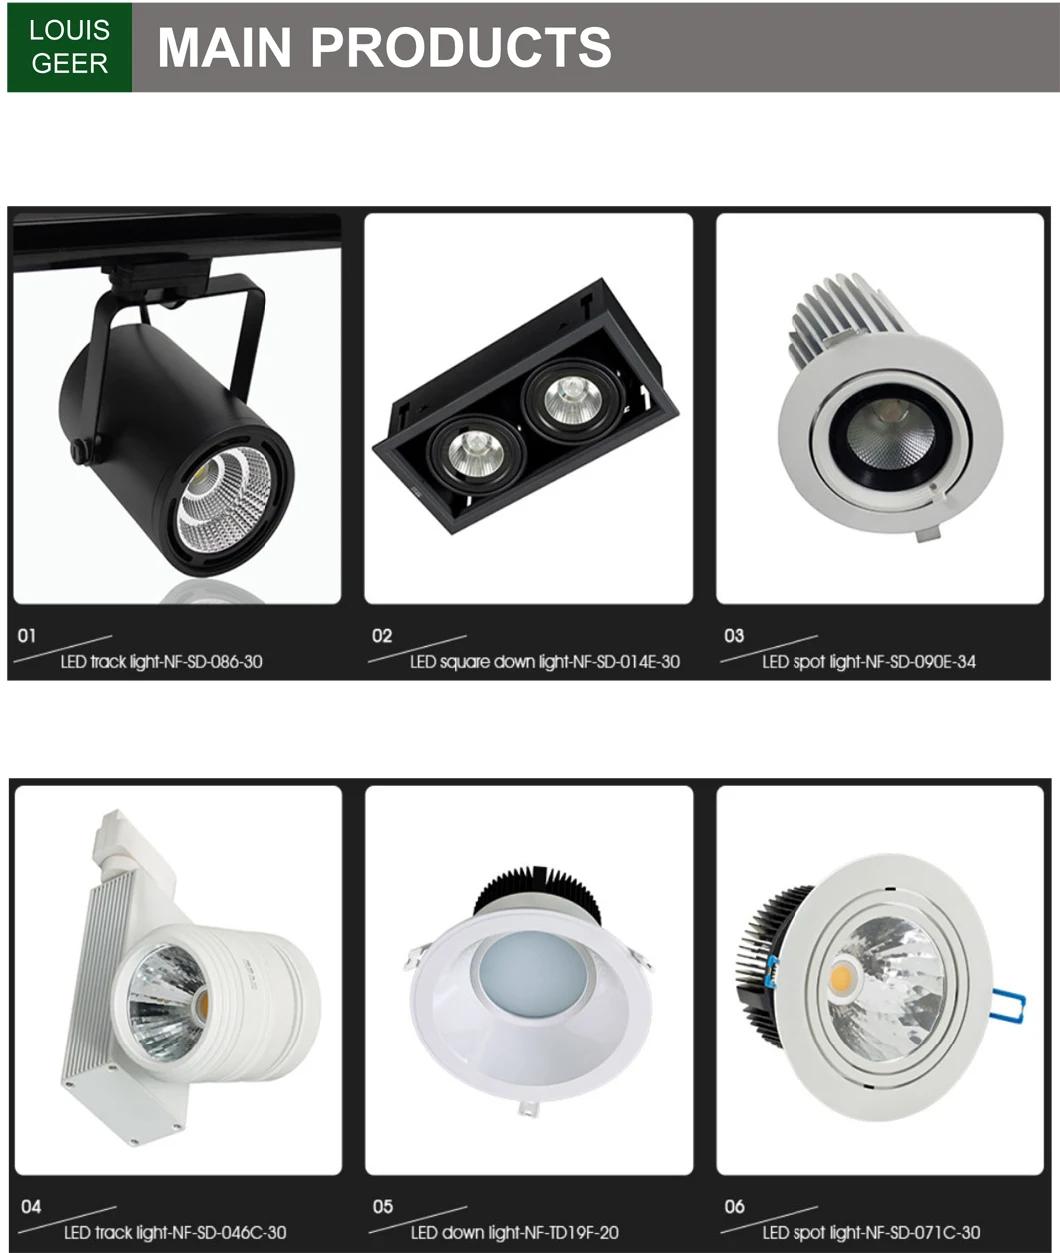 Distributor Aluminum Round Square LED Light Single Double Triple Adjustable Europe Modern COB Down Lights 3*12W 12W 24W 36W LED Ceiling Downlight